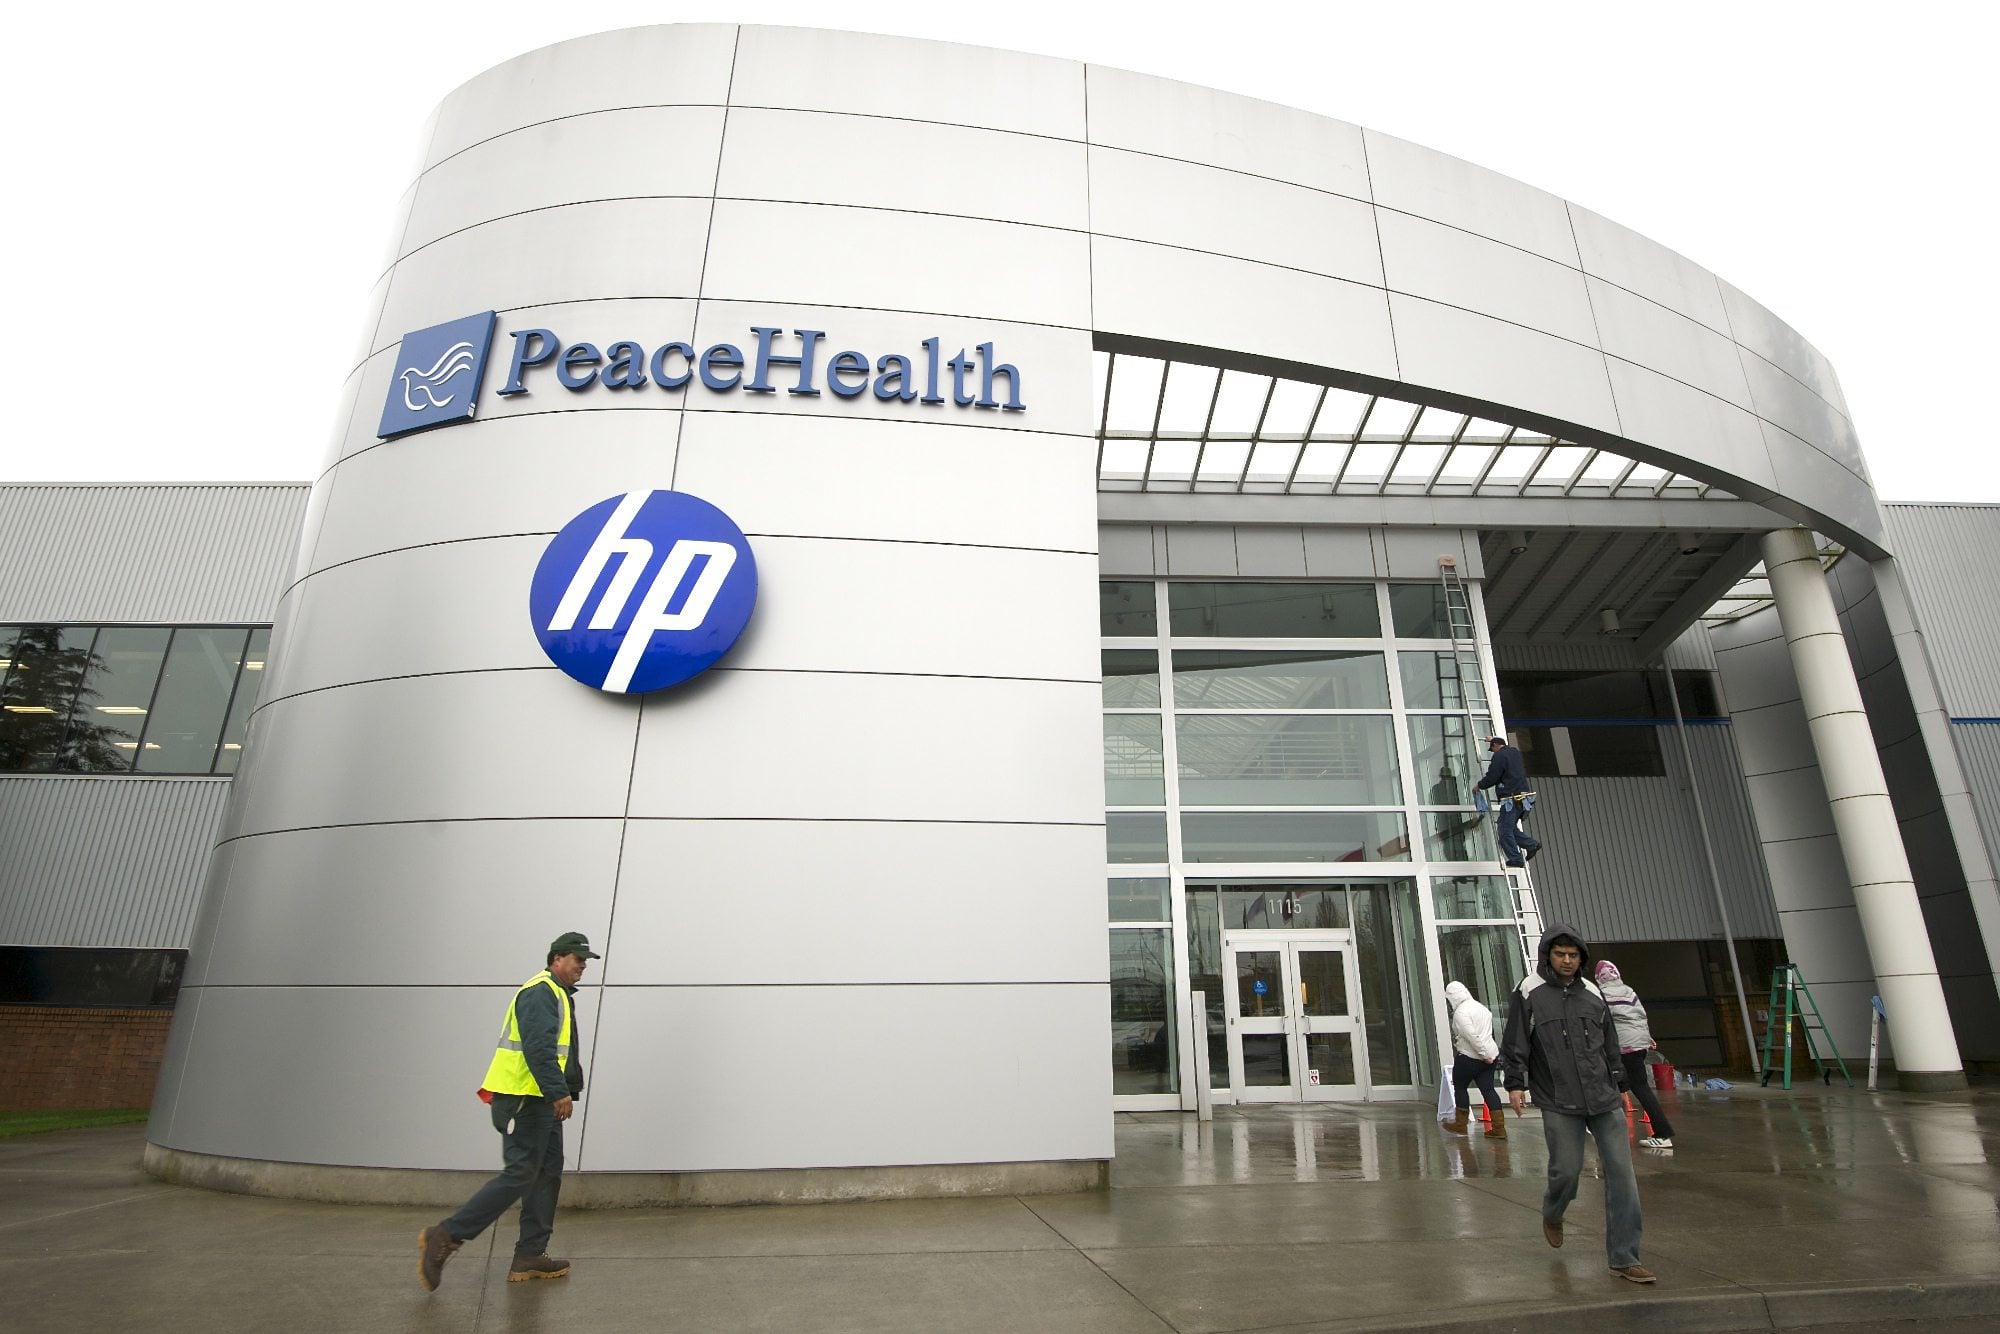 By 2014, PeaceHealth will have 600 workers at Columbia Center at Columbia Tech Center, occupying roughly one-third of the 478,000-square-foot building in east Vancouver.